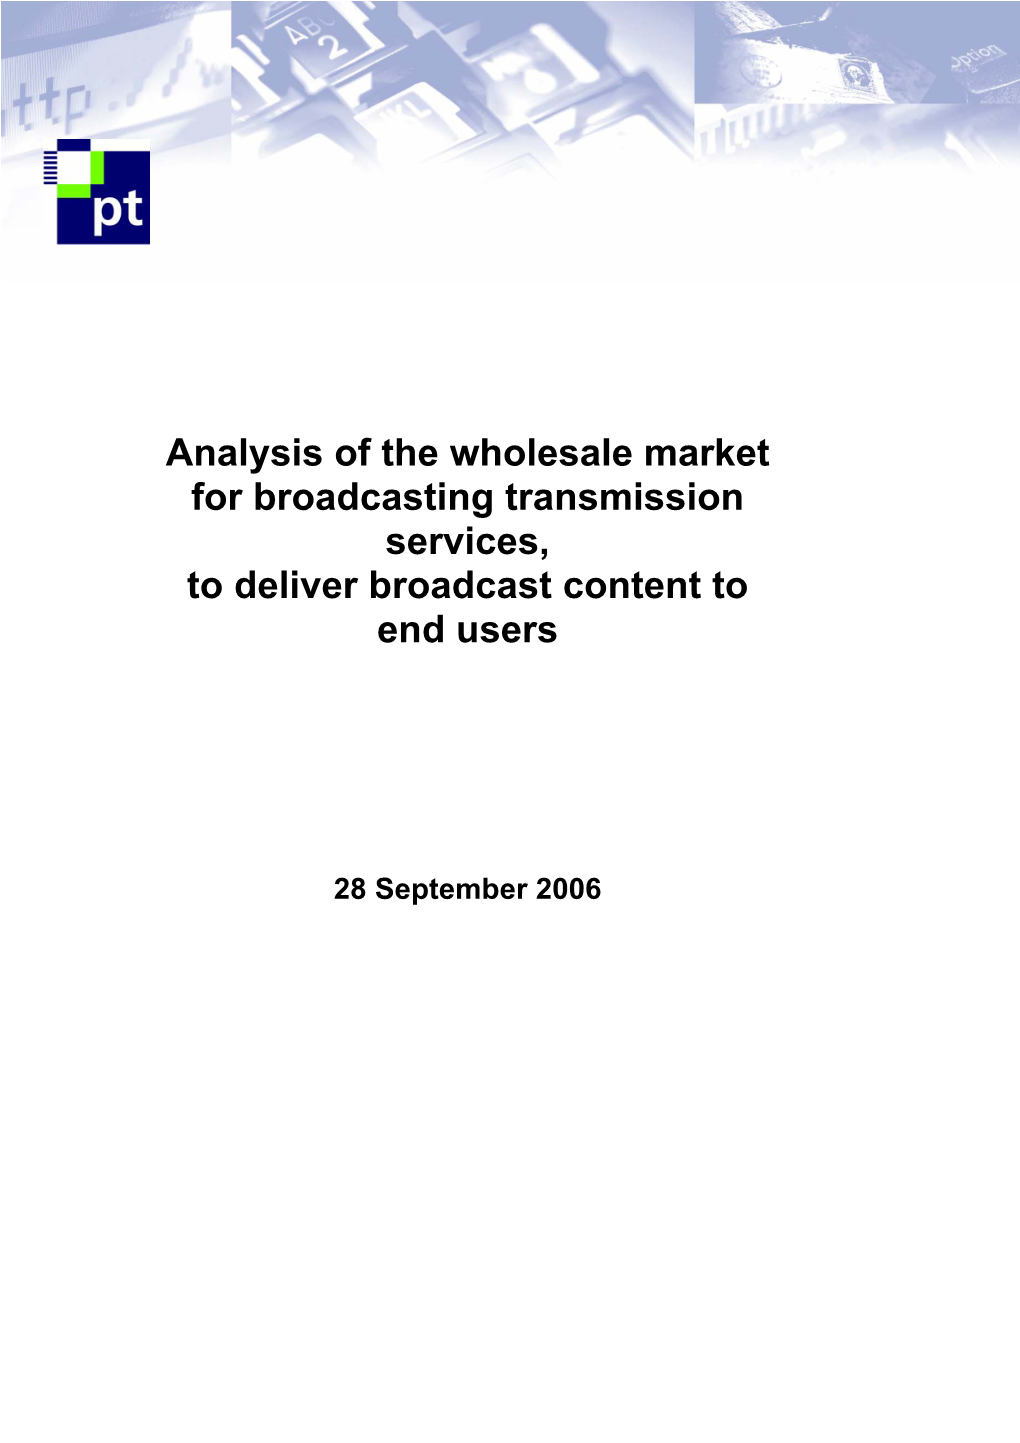 Analysis of the Wholesale Market for Broadcasting Transmission Services, to Deliver Broadcast Content to End Users